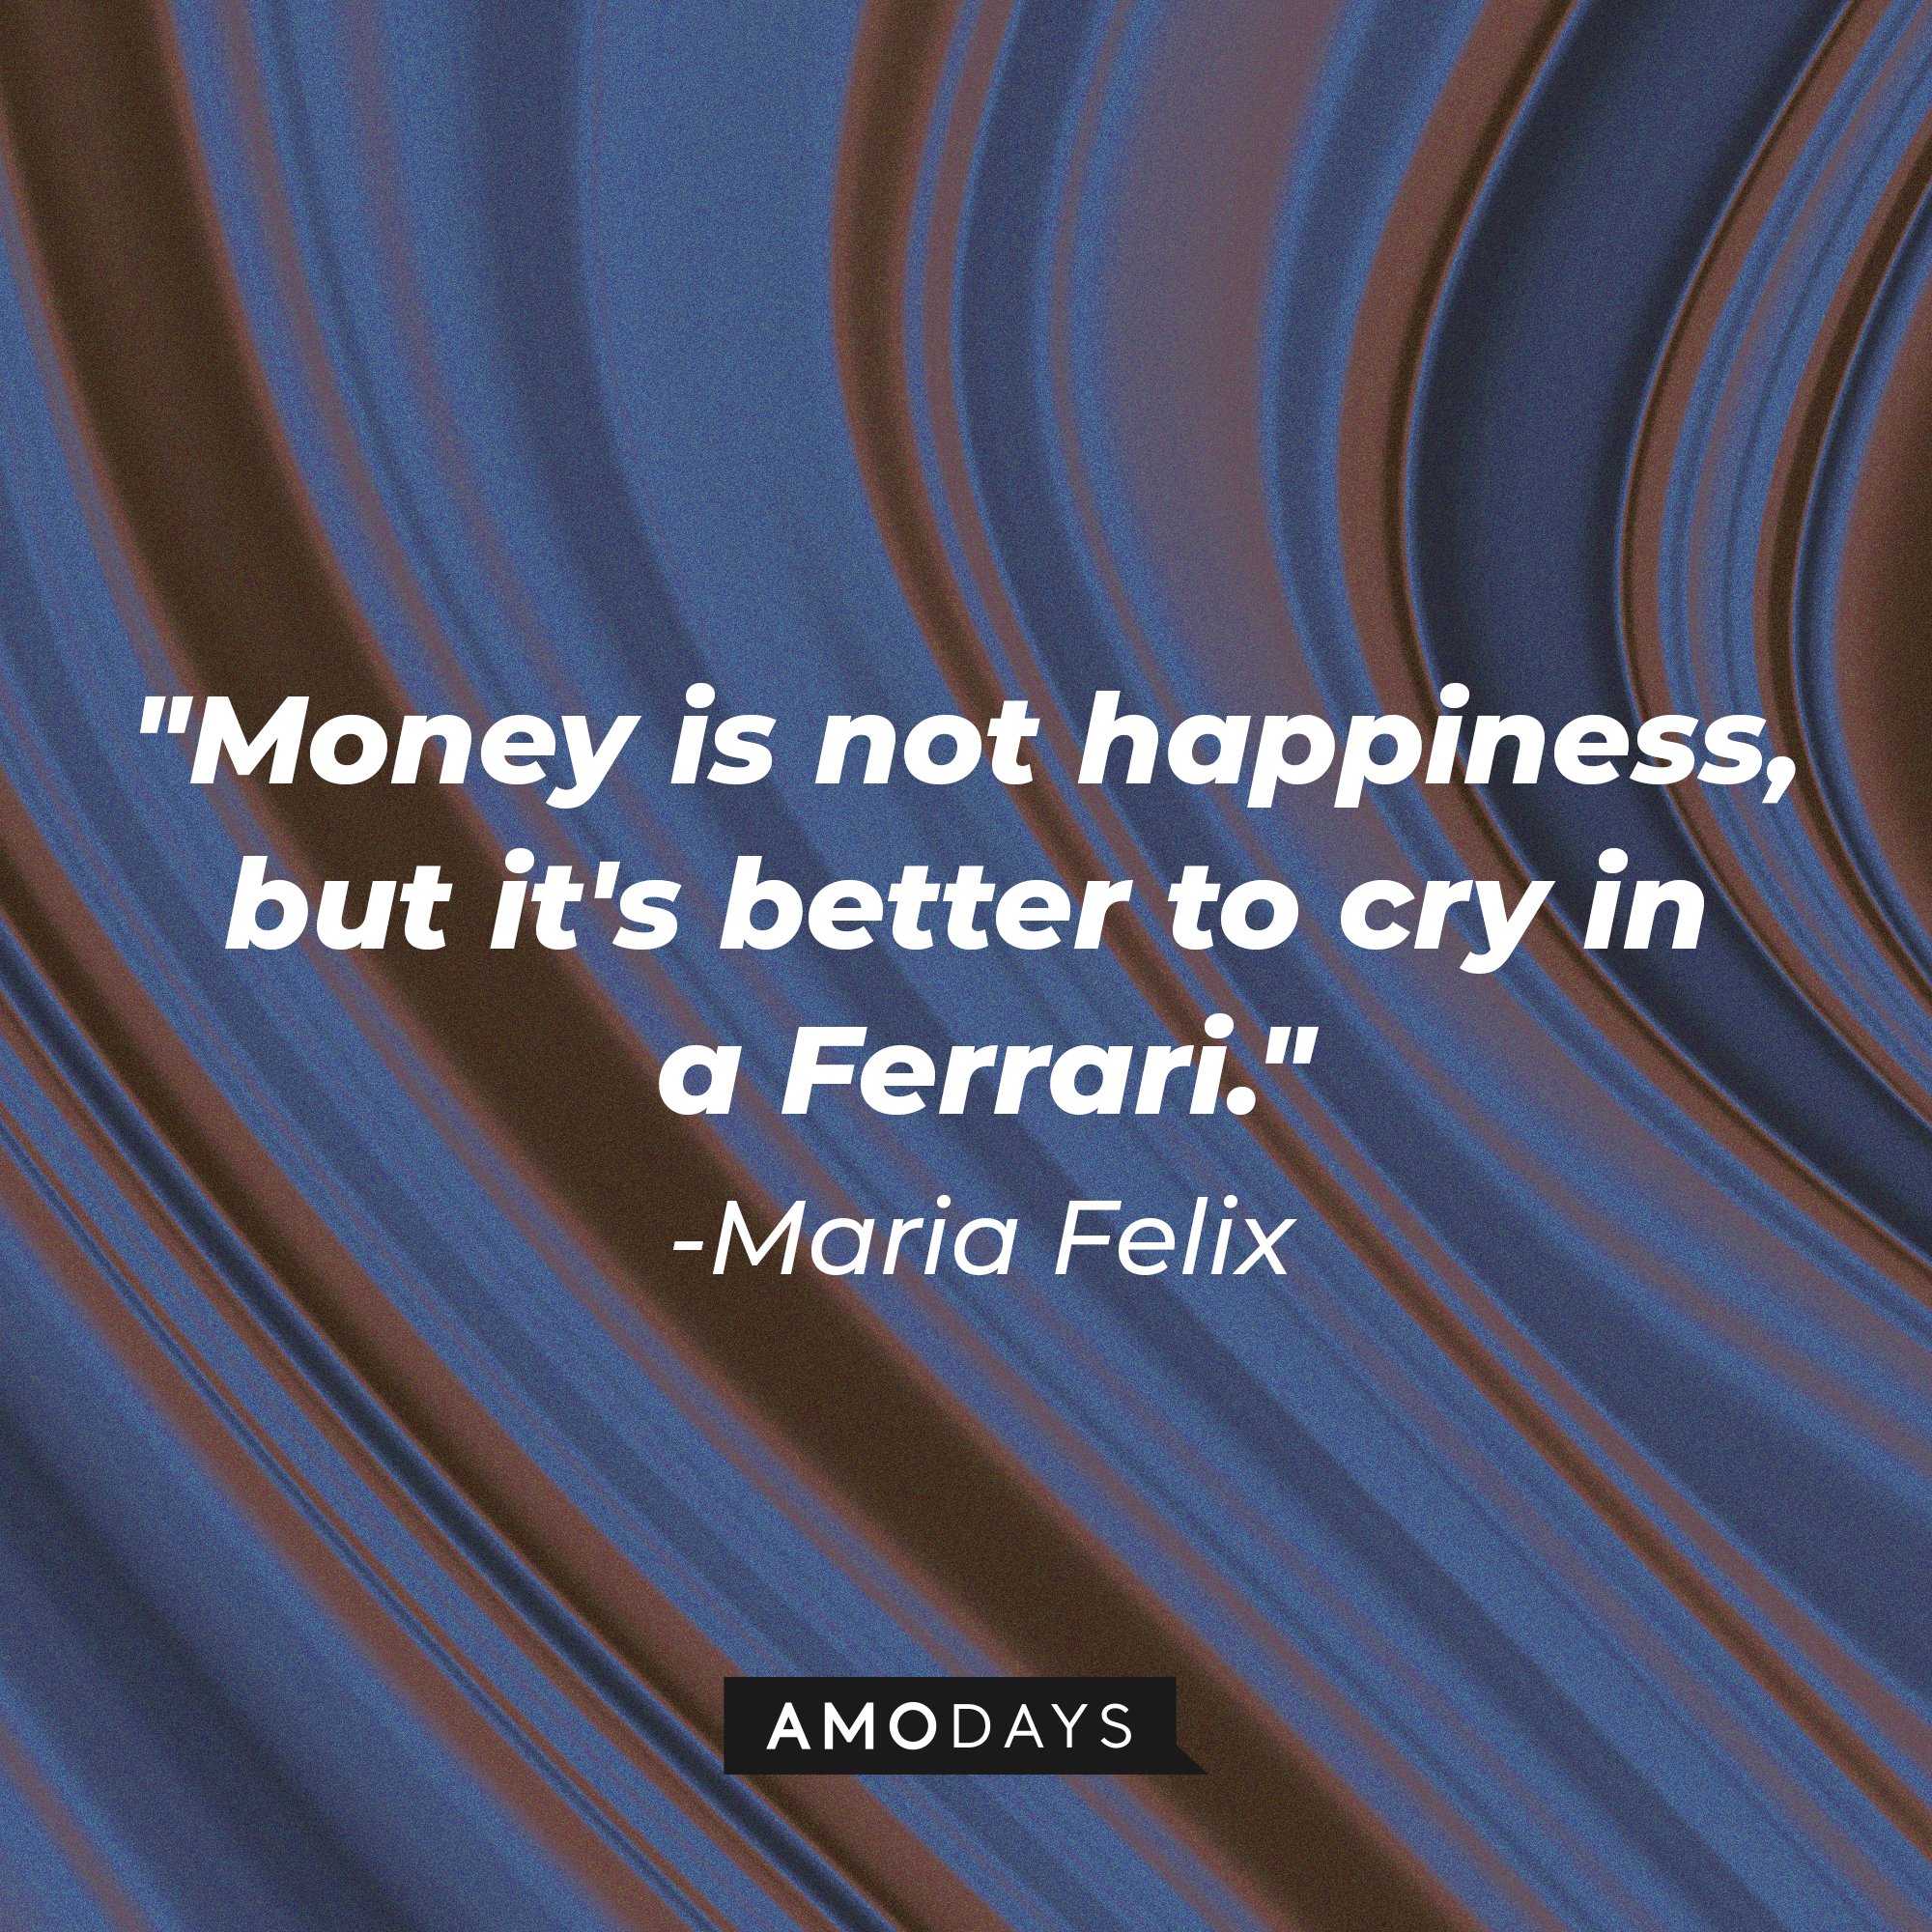 Maria Felix’s quote: "Money is not happiness, but it's better to cry in a Ferrari." | Image: AmoDays